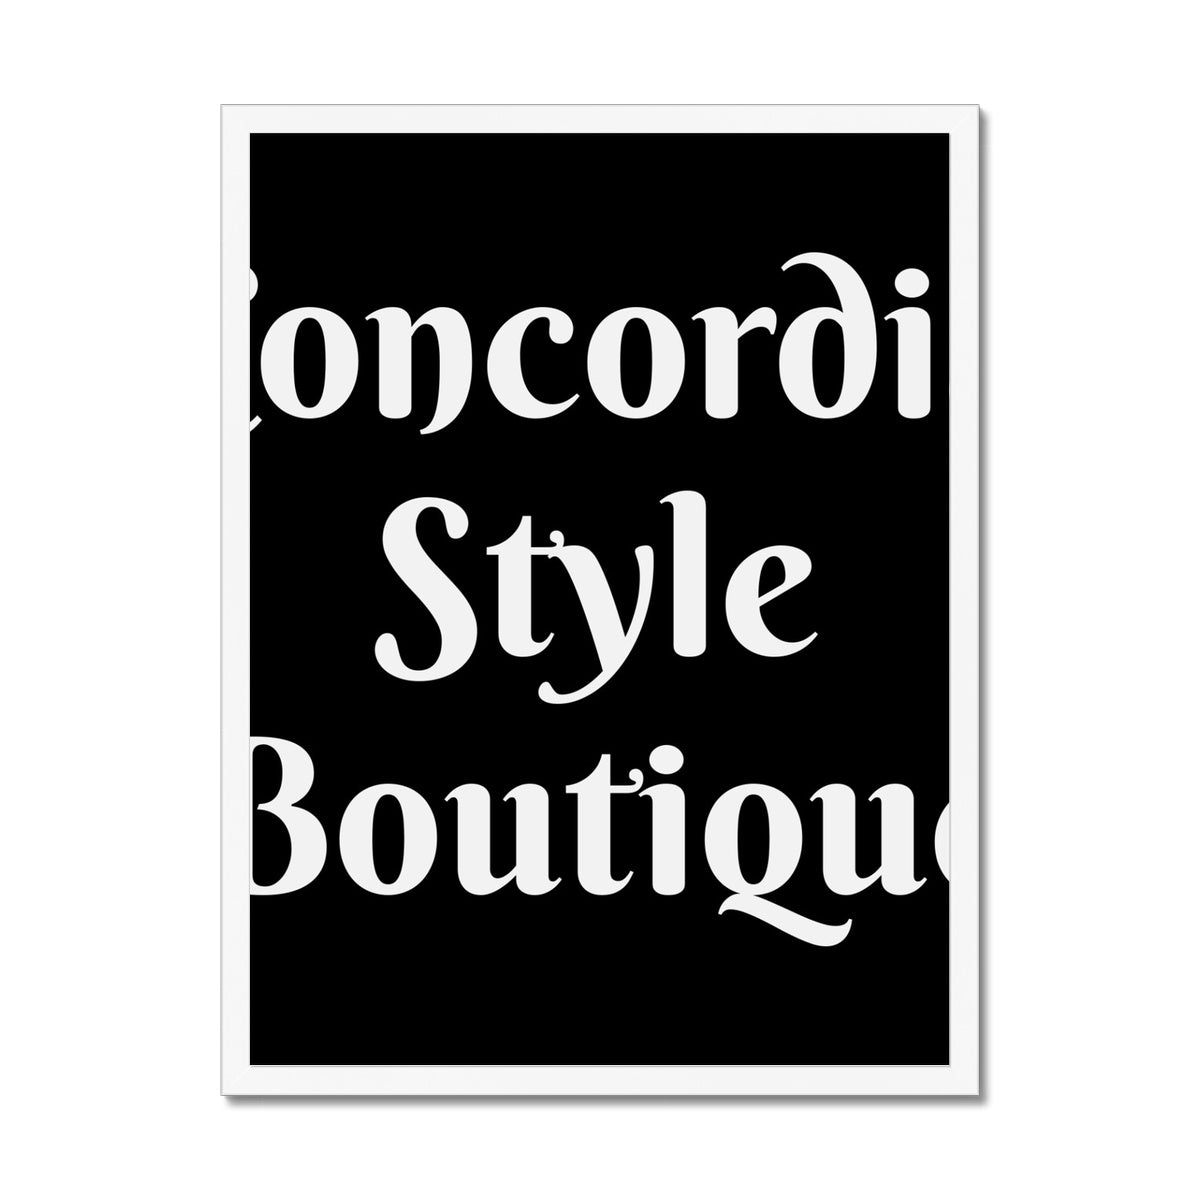 Concordia Style Boutique Framed Print